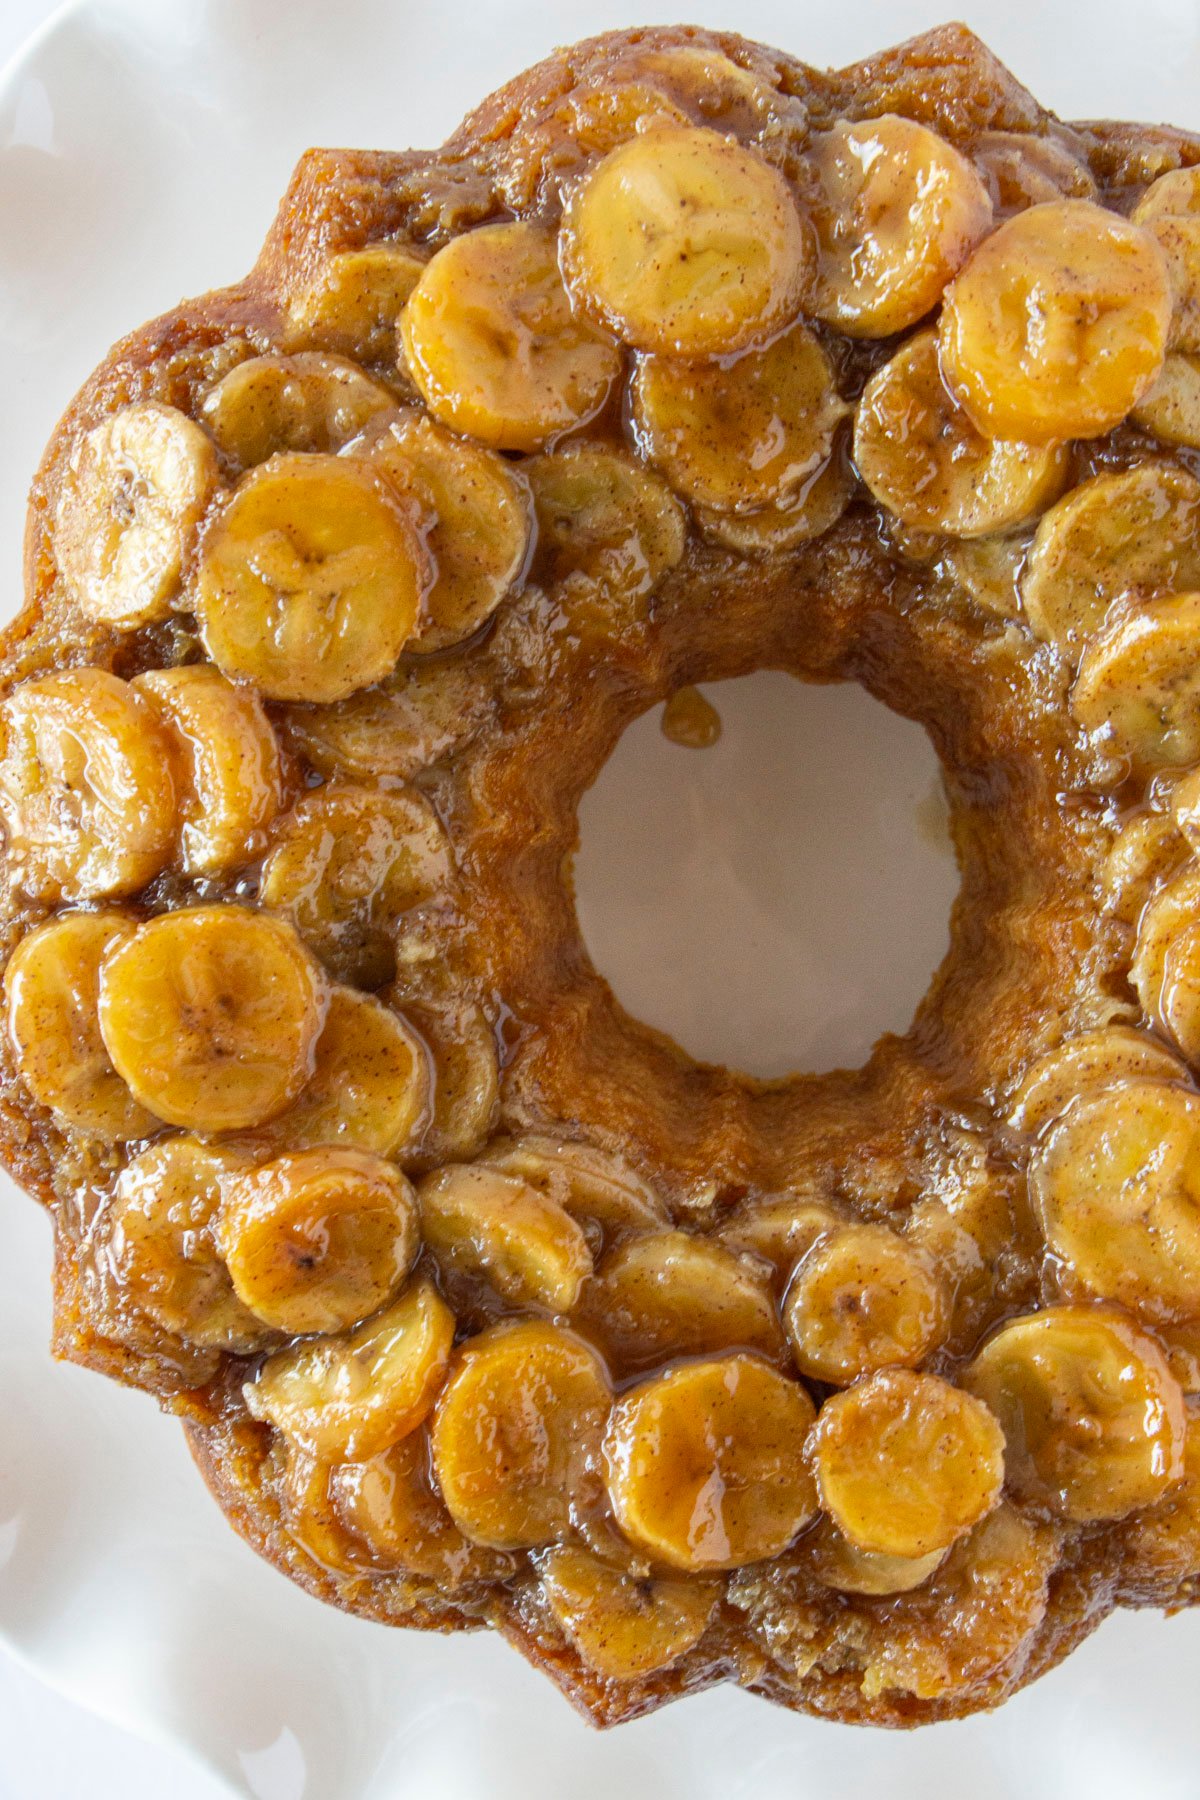 A fresh banana upside down cake before cutting into slices.